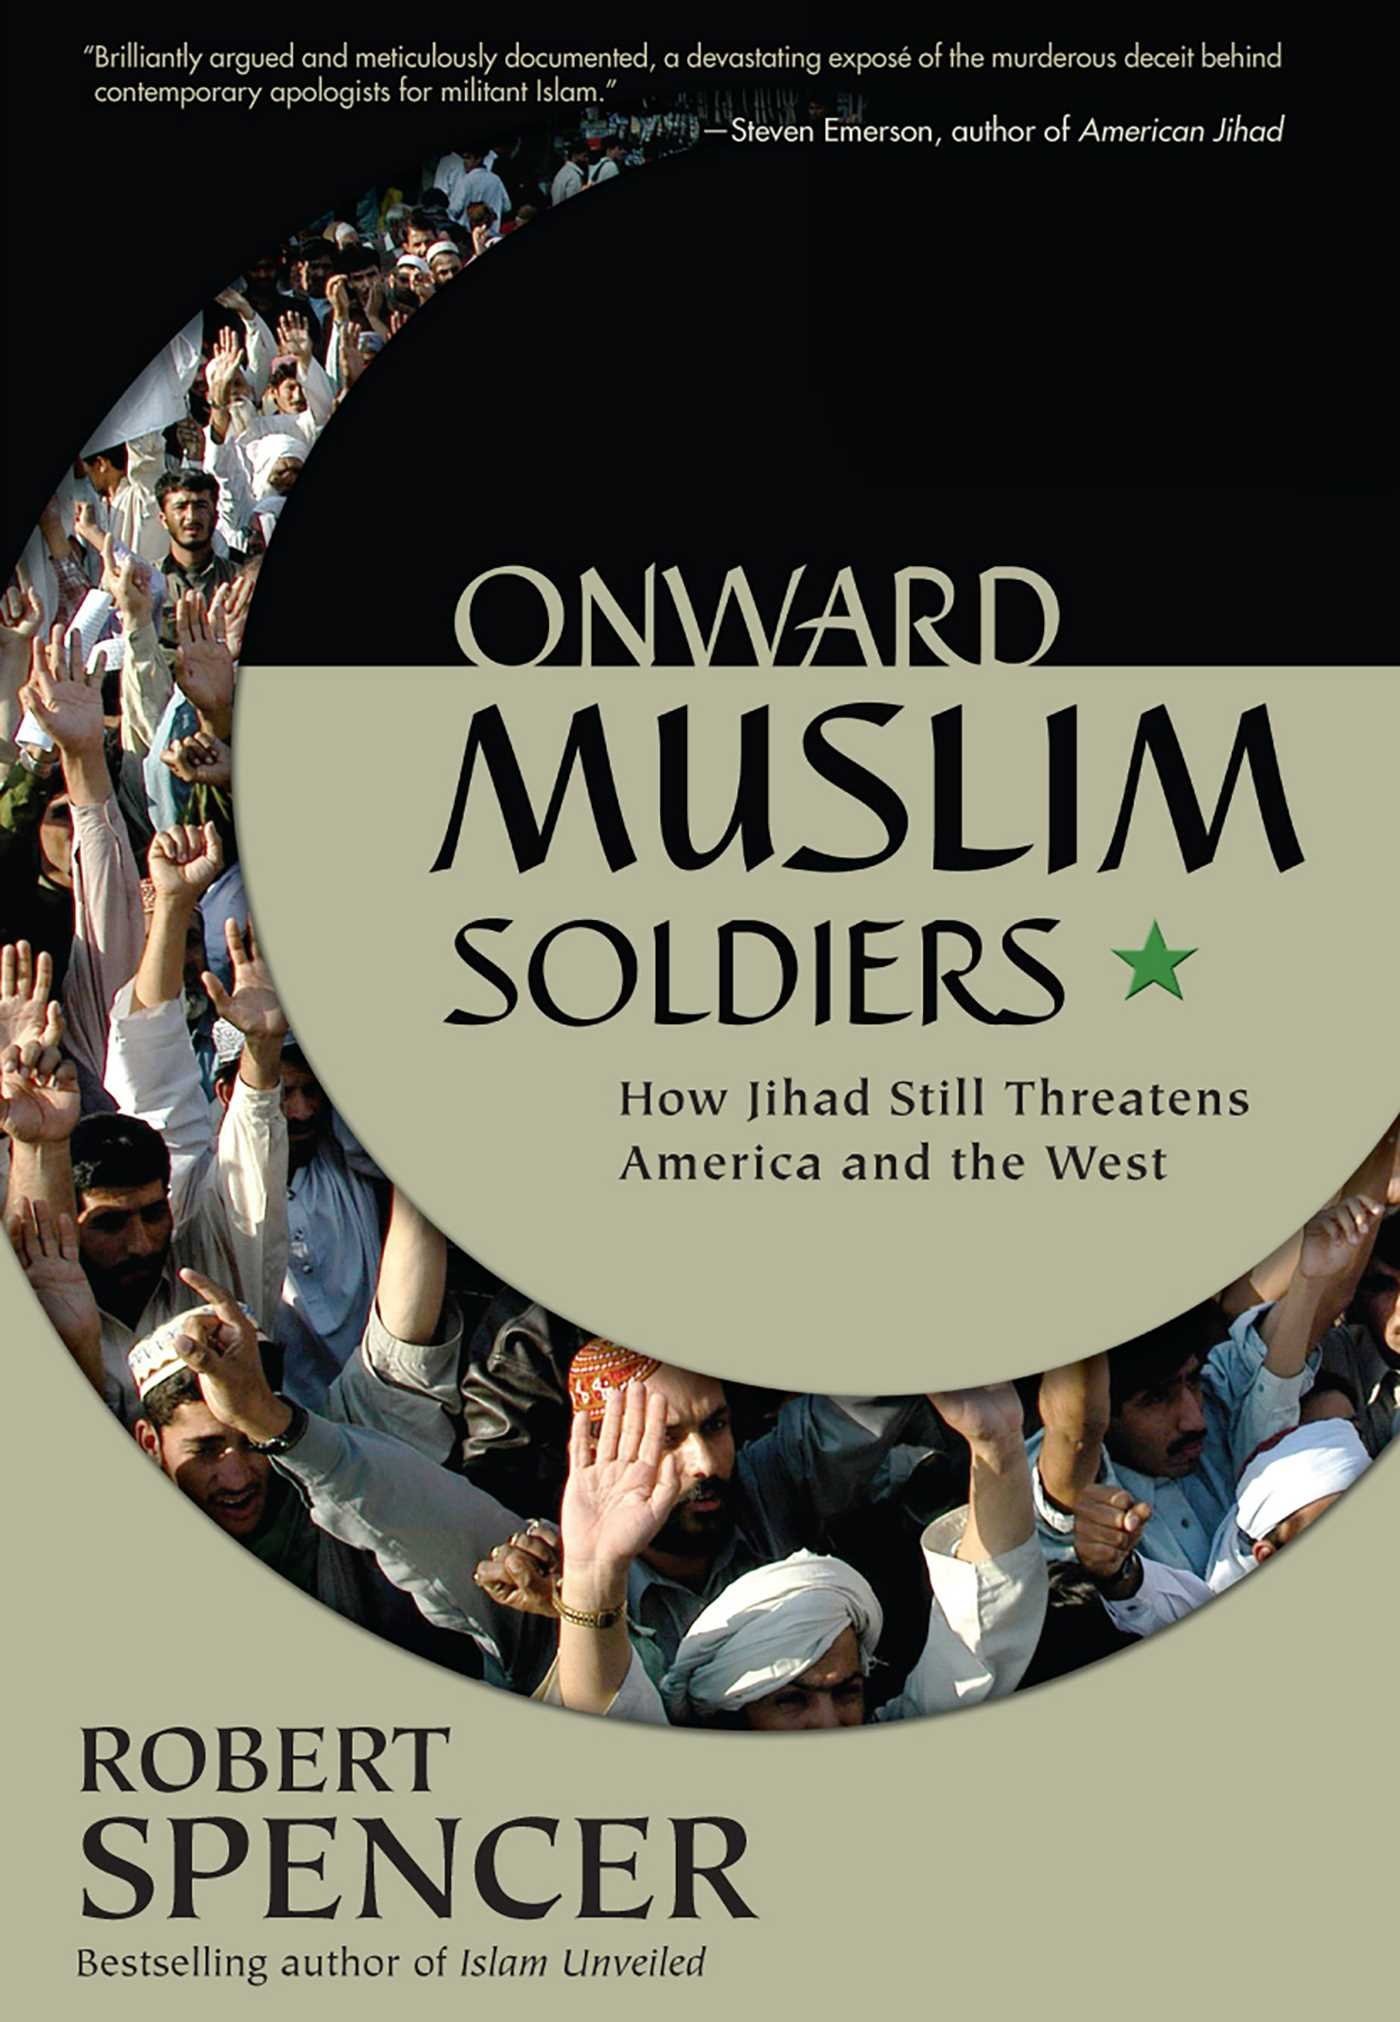 Onward Muslim Soldiers: How Jihad Still Threatens America and the West